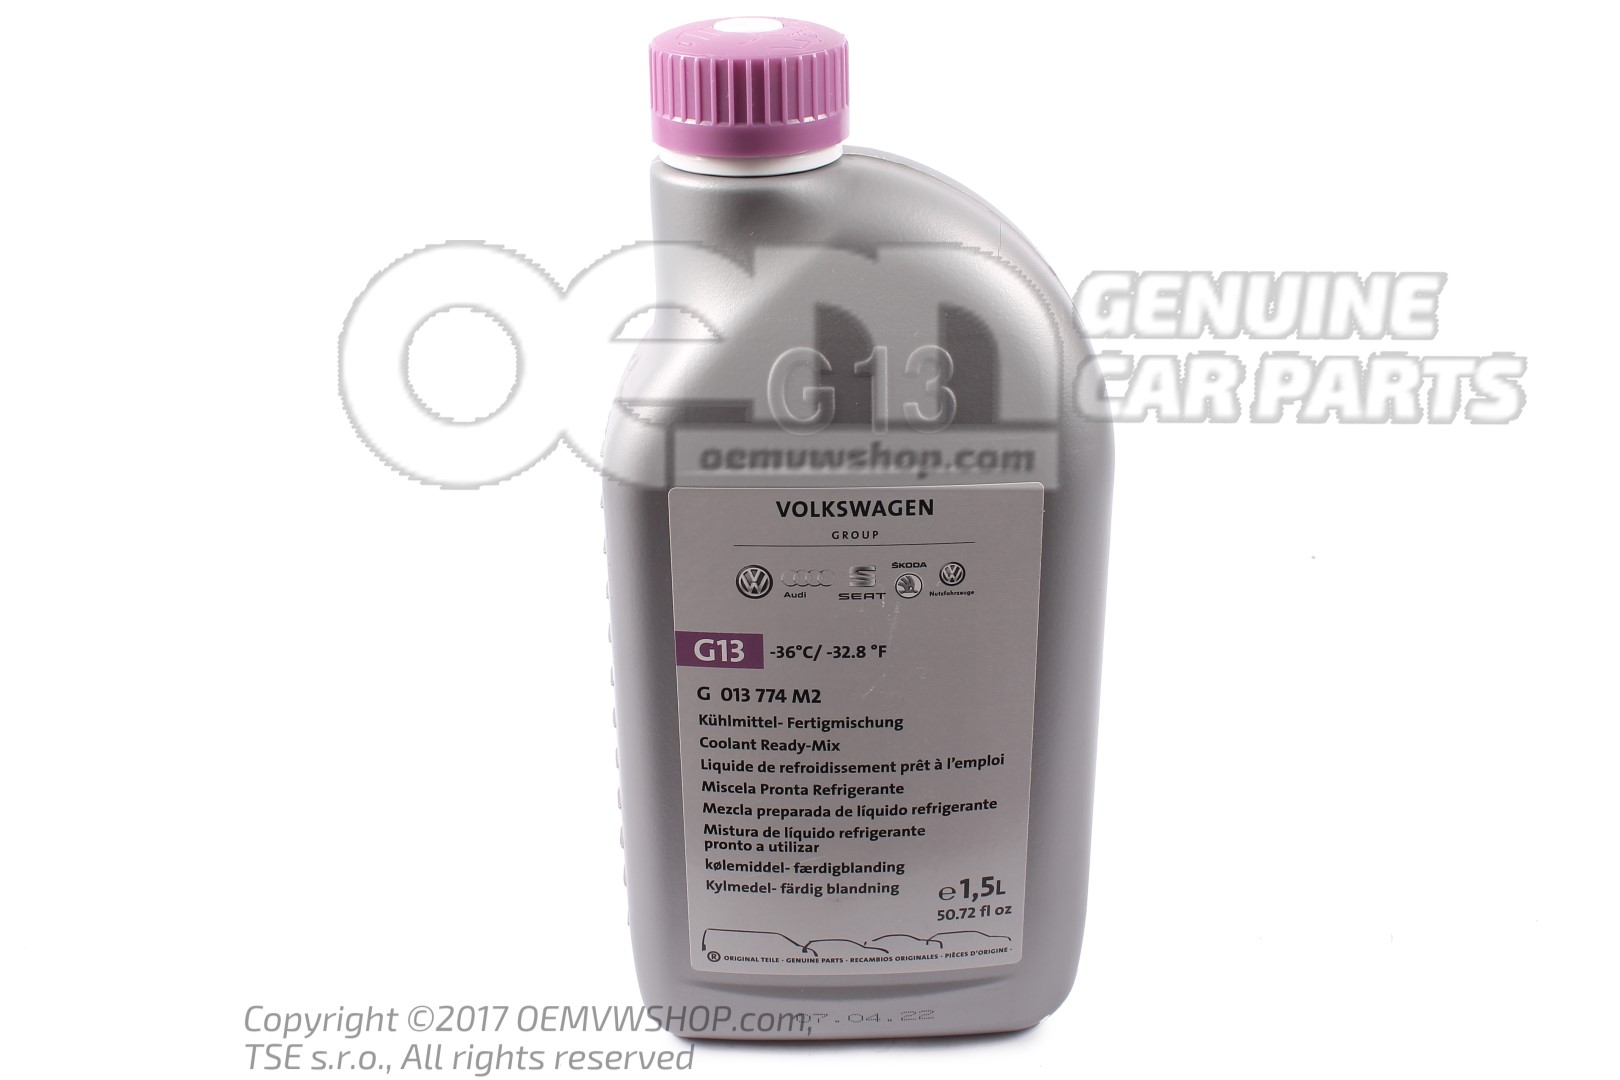 G 12e050a2 Ready Mix Coolant Frost Protection Up To 35 A C Oemvwshop Com